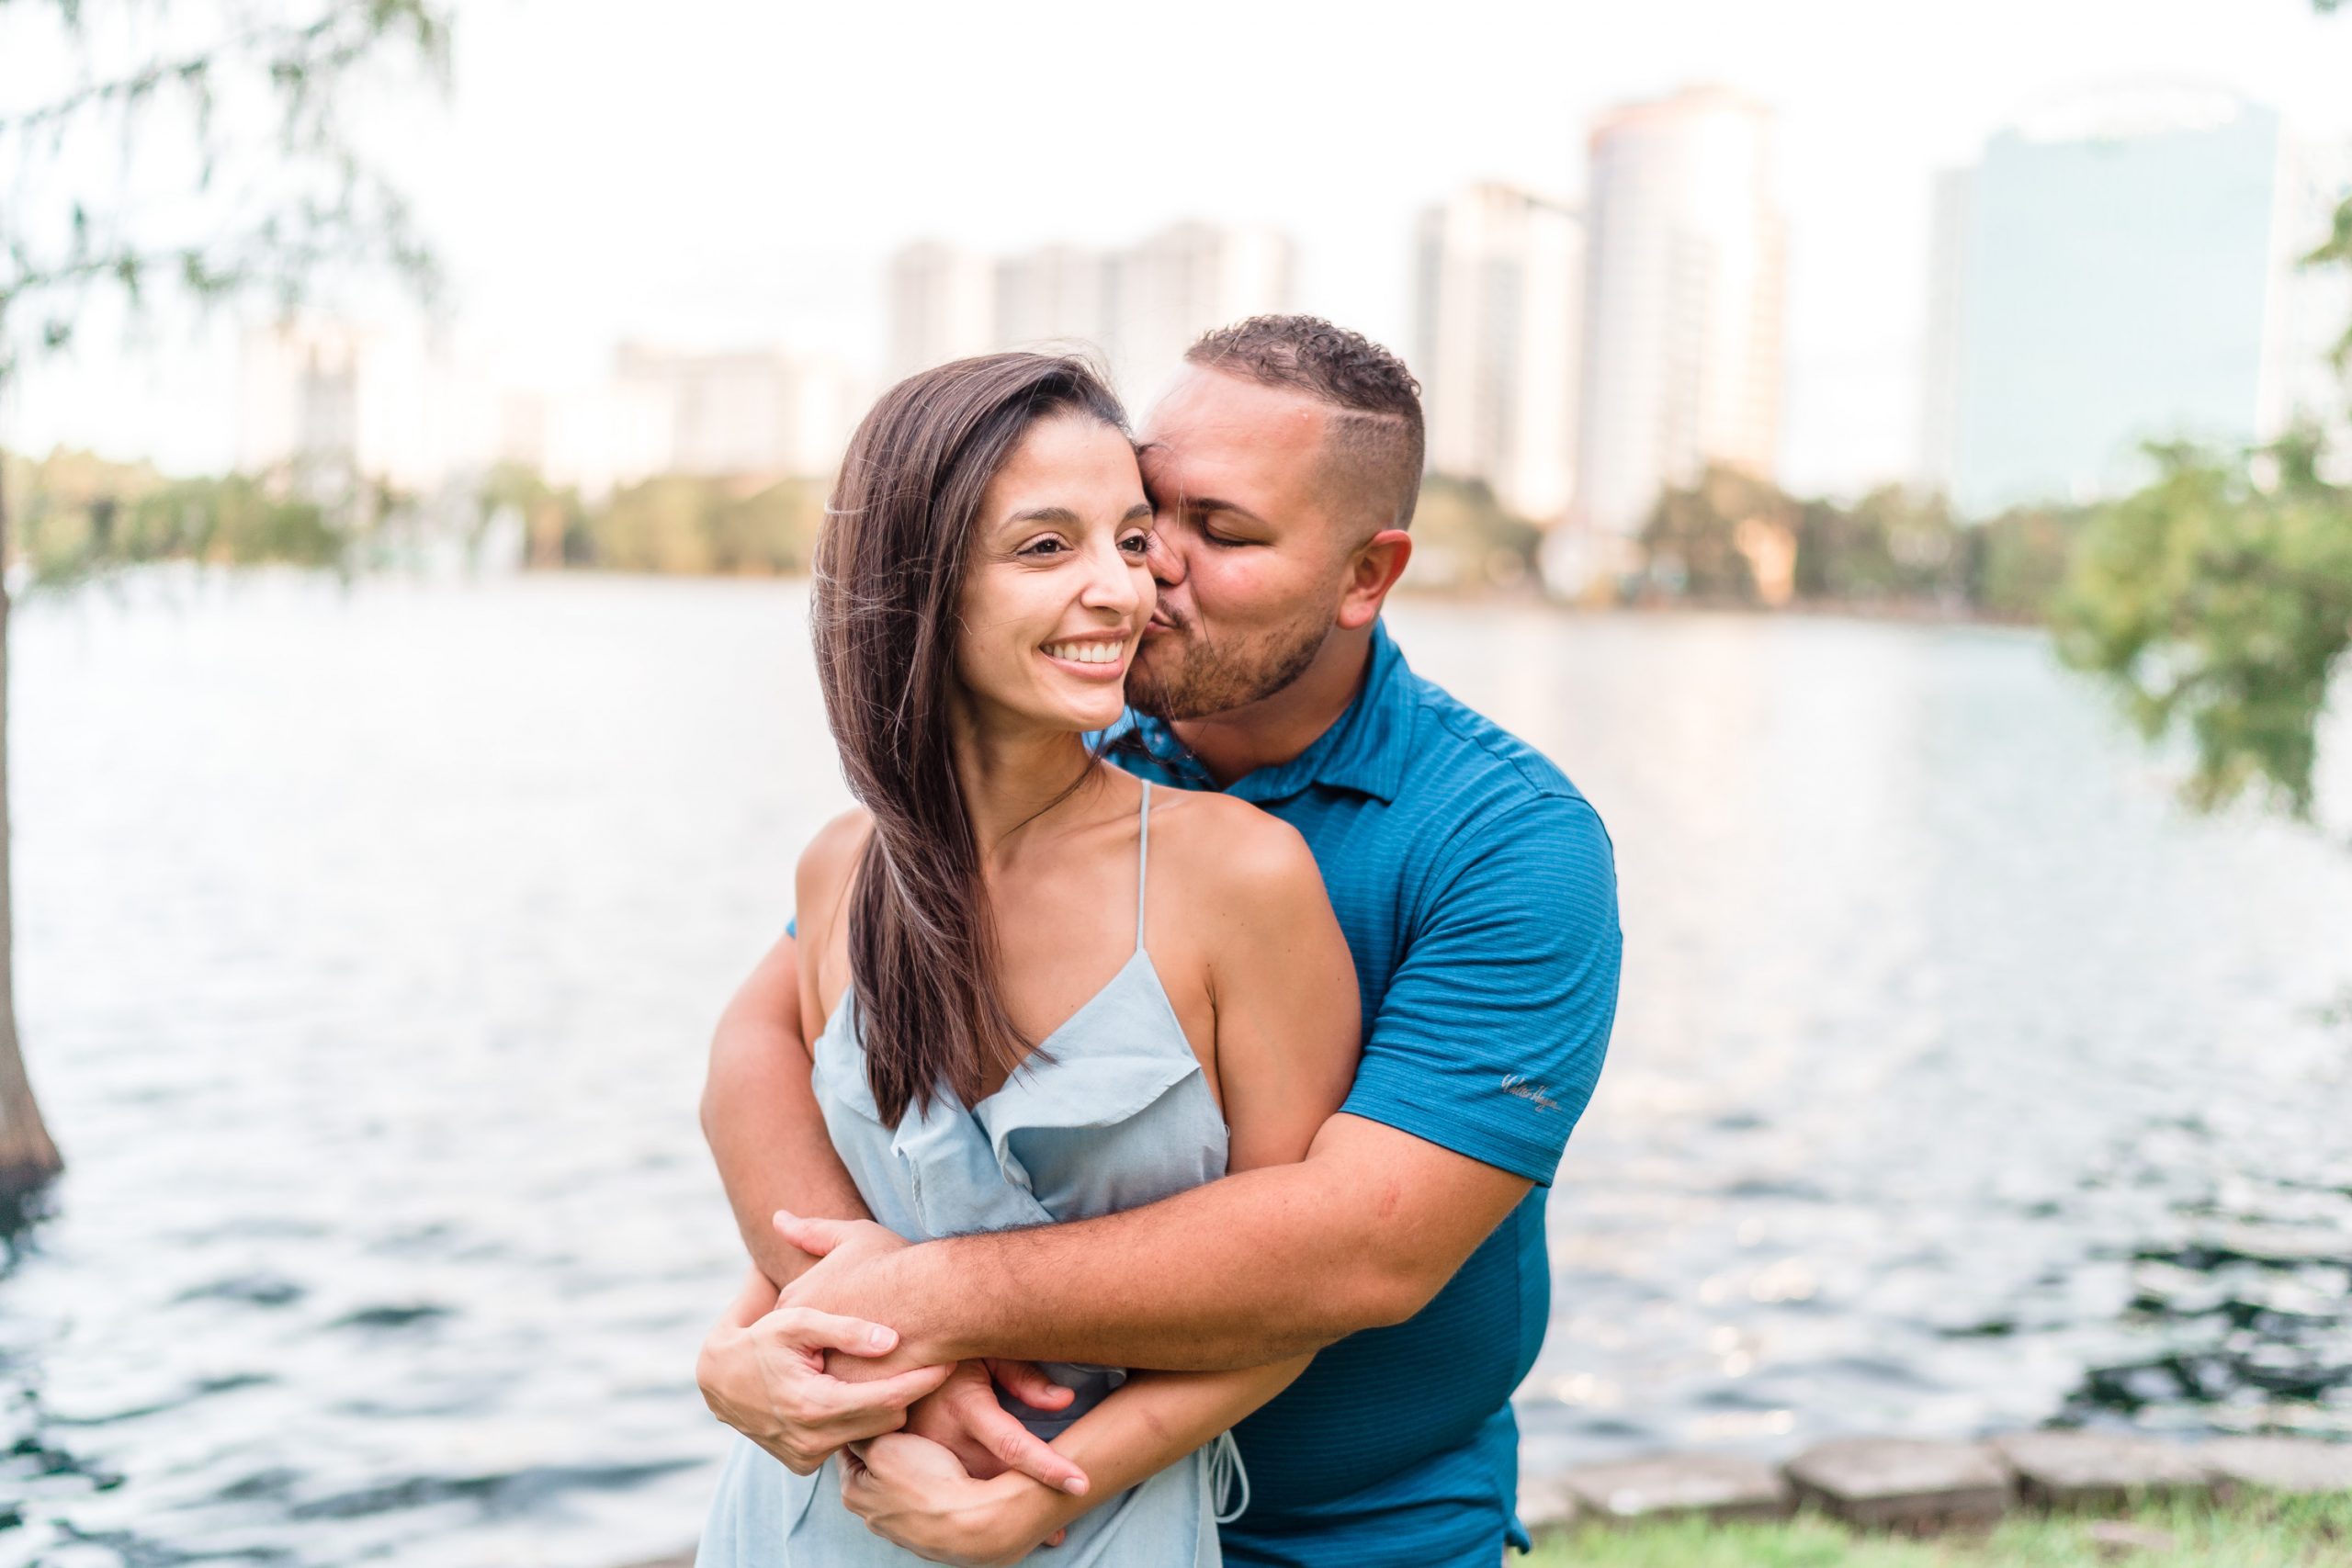 Engagement photography session at Lake Eola in downtown Orlando